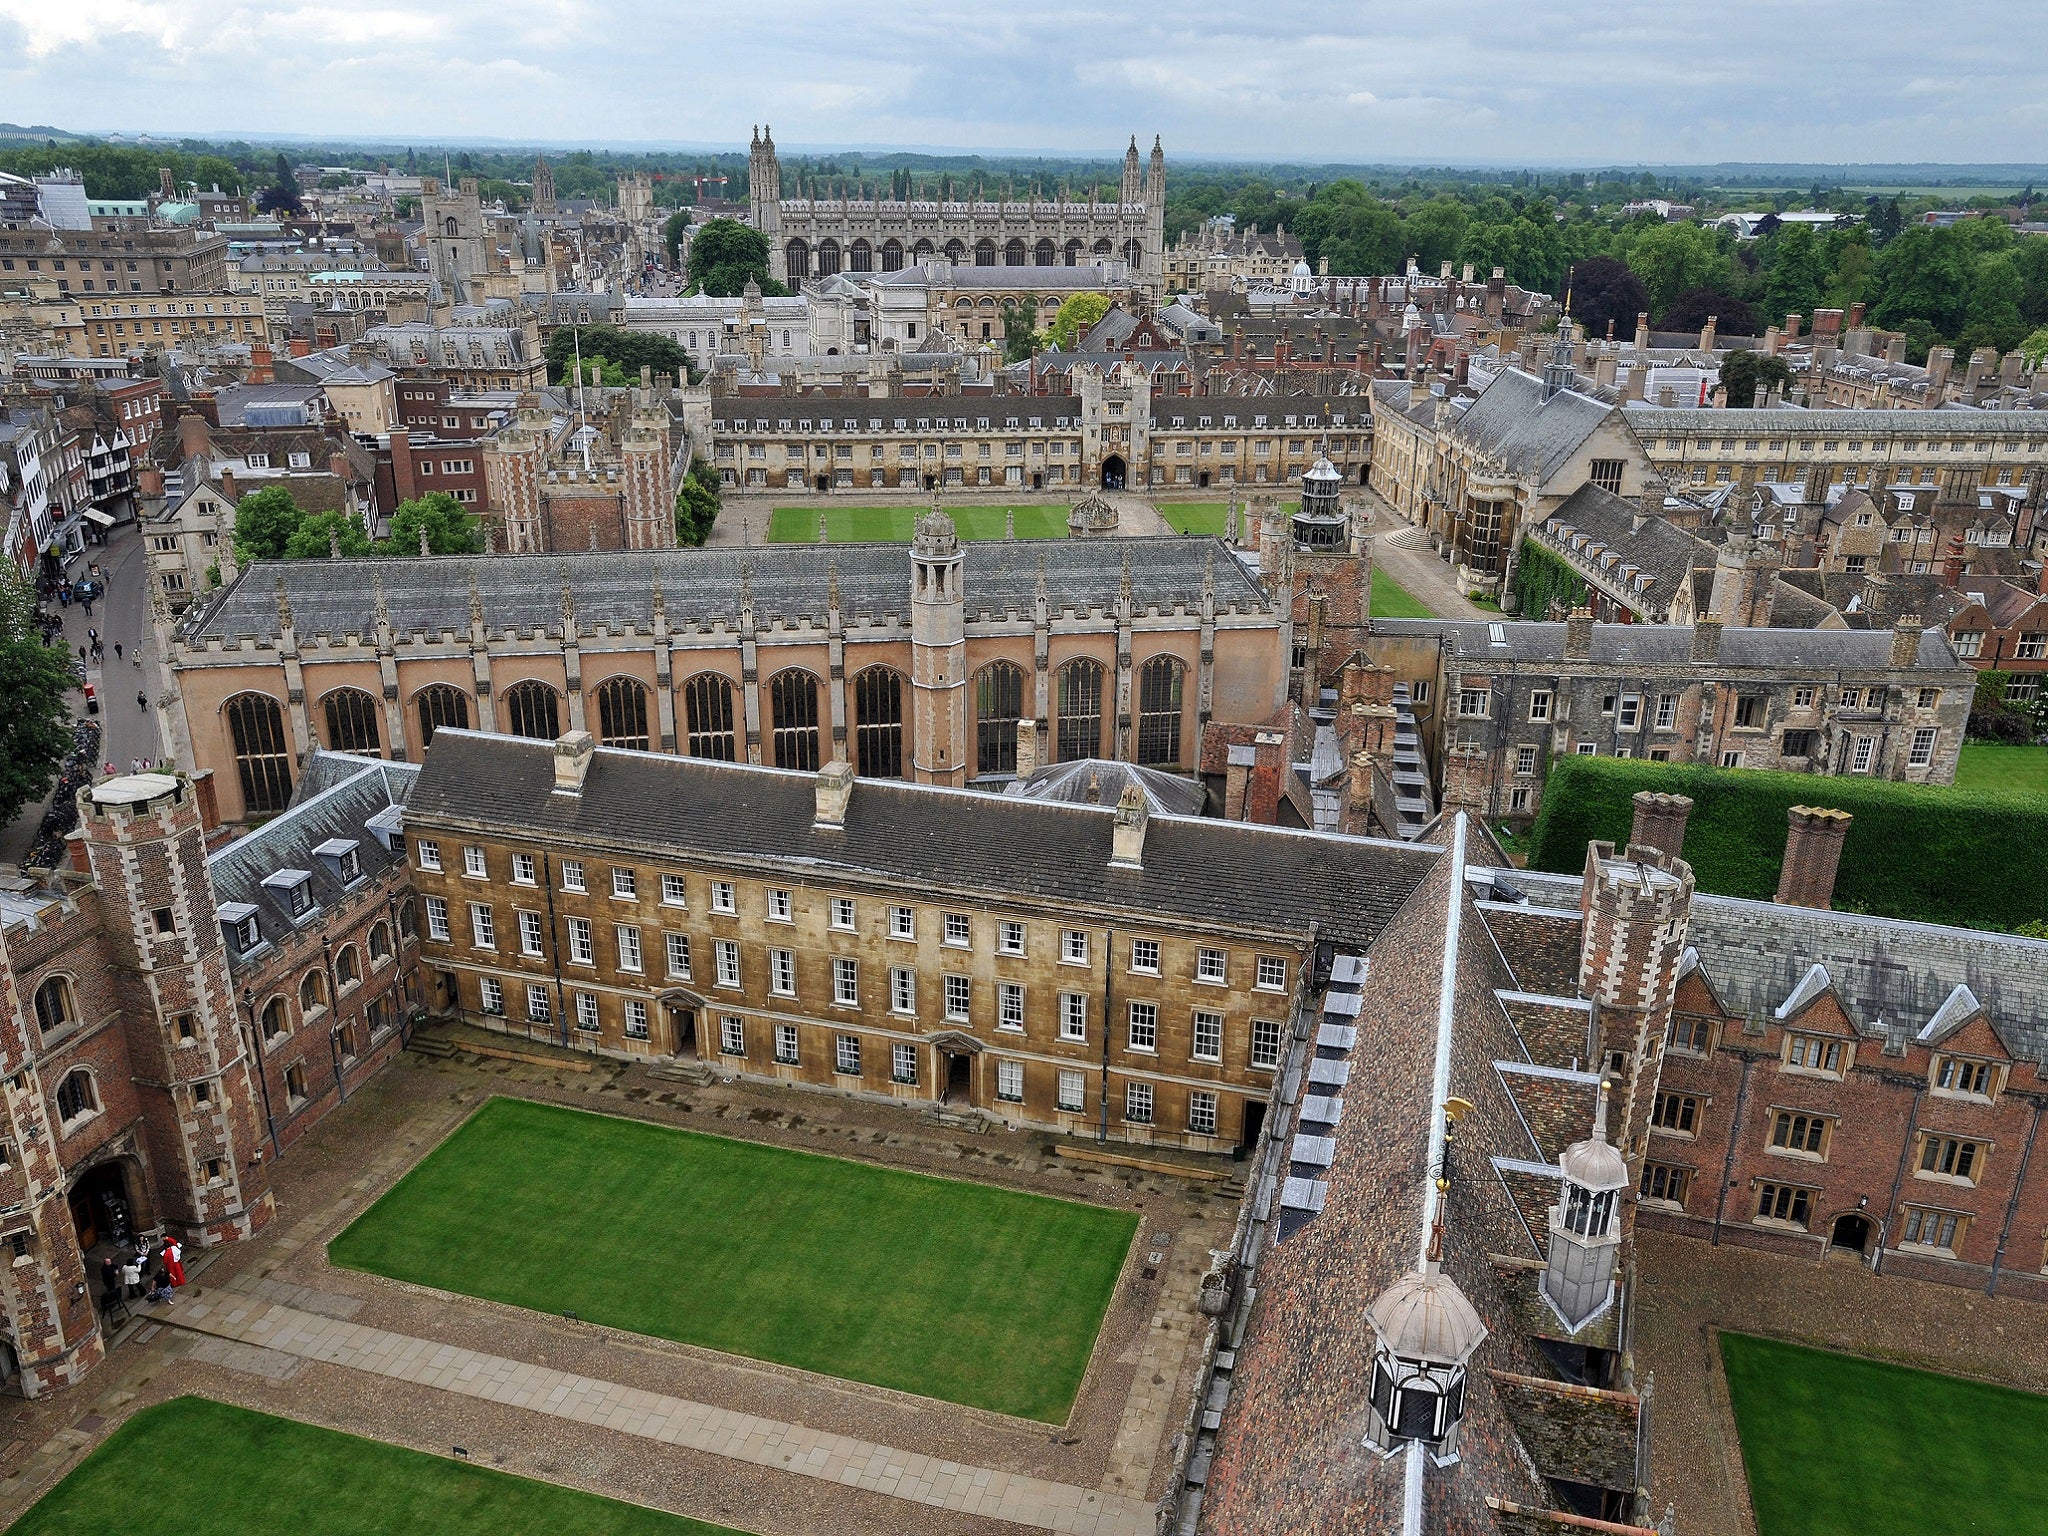 The University of Cambridge awarded the second highest salary to its vice-chancellor